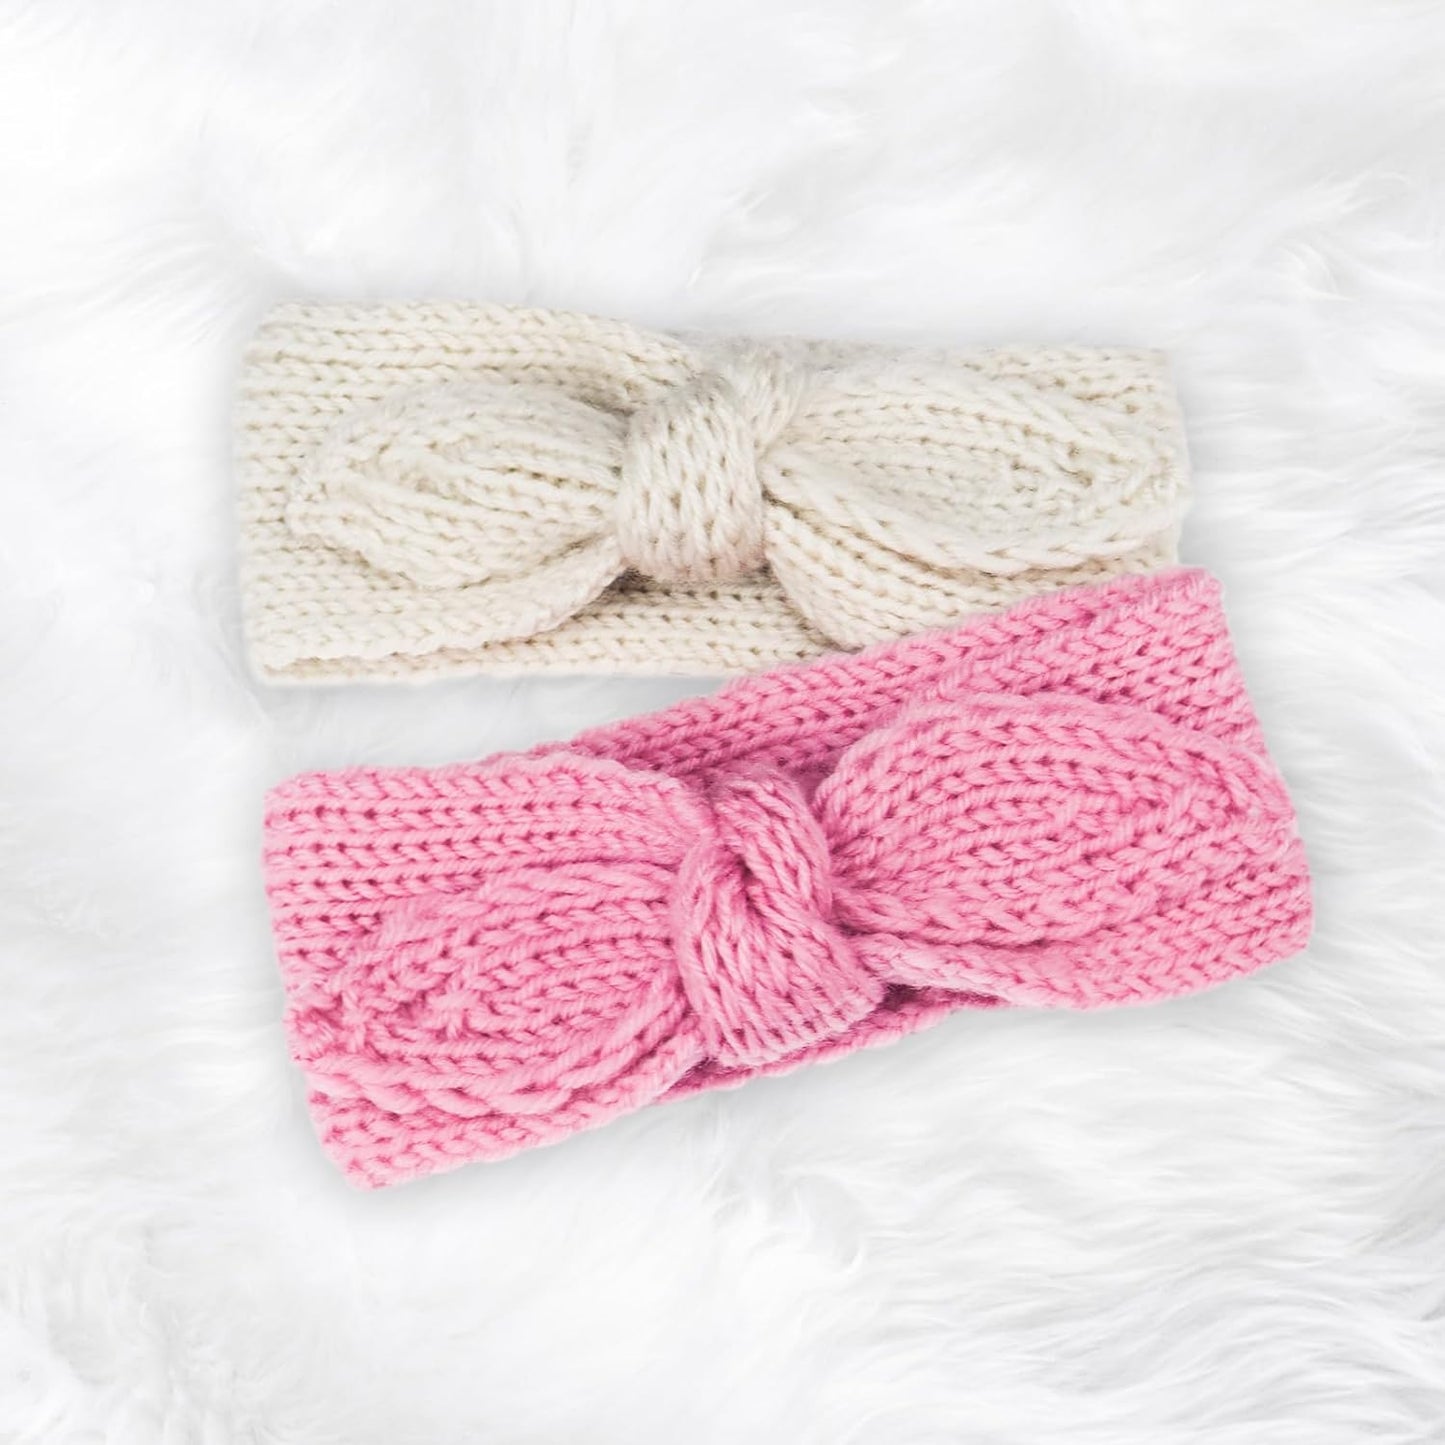 Fmeida 3 Pack Baby Girl Headband, Warm Rabbit Knot Hair Band, Knit Head Wrap Elastics Hairbands, Hair Accessories for Newborn Infant Toddlers Kids Children | White+Camel+Coffee